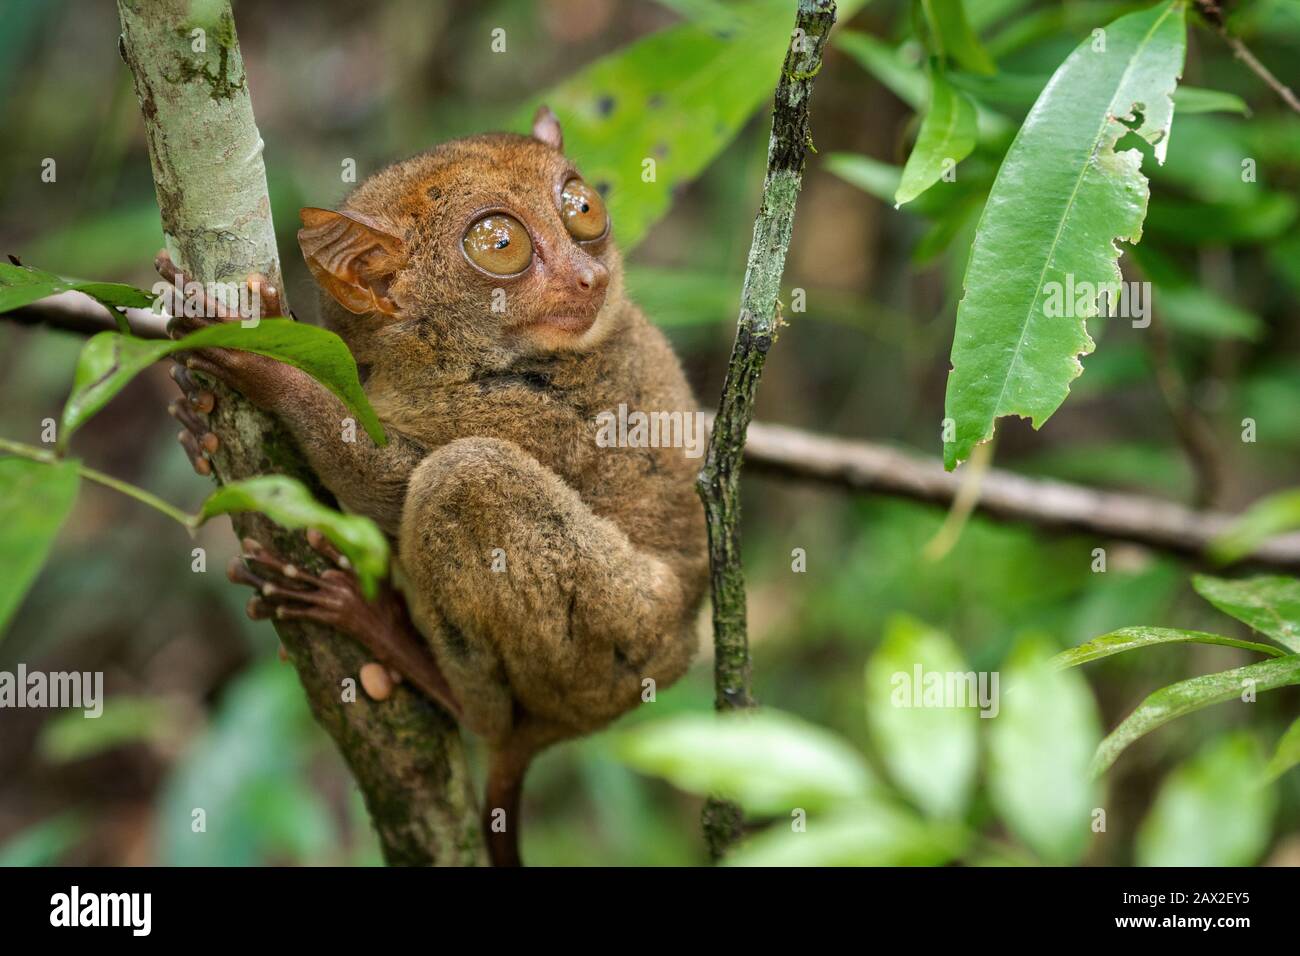 Philippine Tarsier, one of the smallest primates, in its natural habitat in Bohol, Philippines. Stock Photo